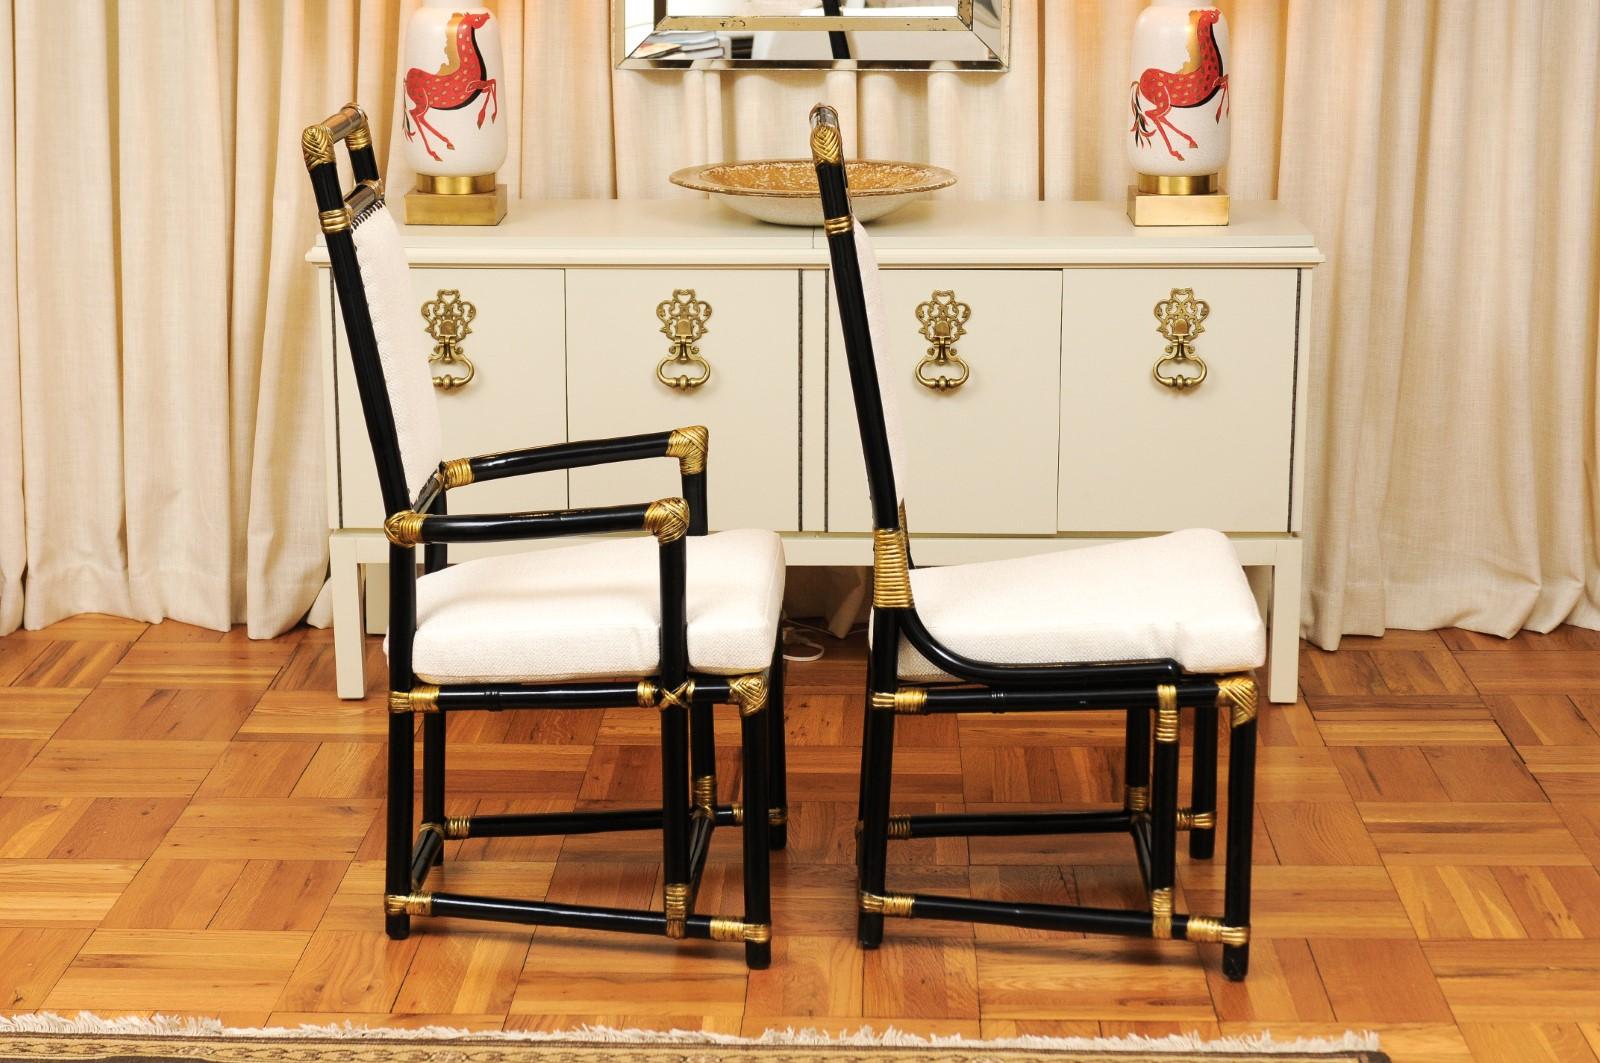 Mid-20th Century Regal Set of 12 Egyptian Revival Throne Dining Chairs by Henry Olko, circa 1955 For Sale